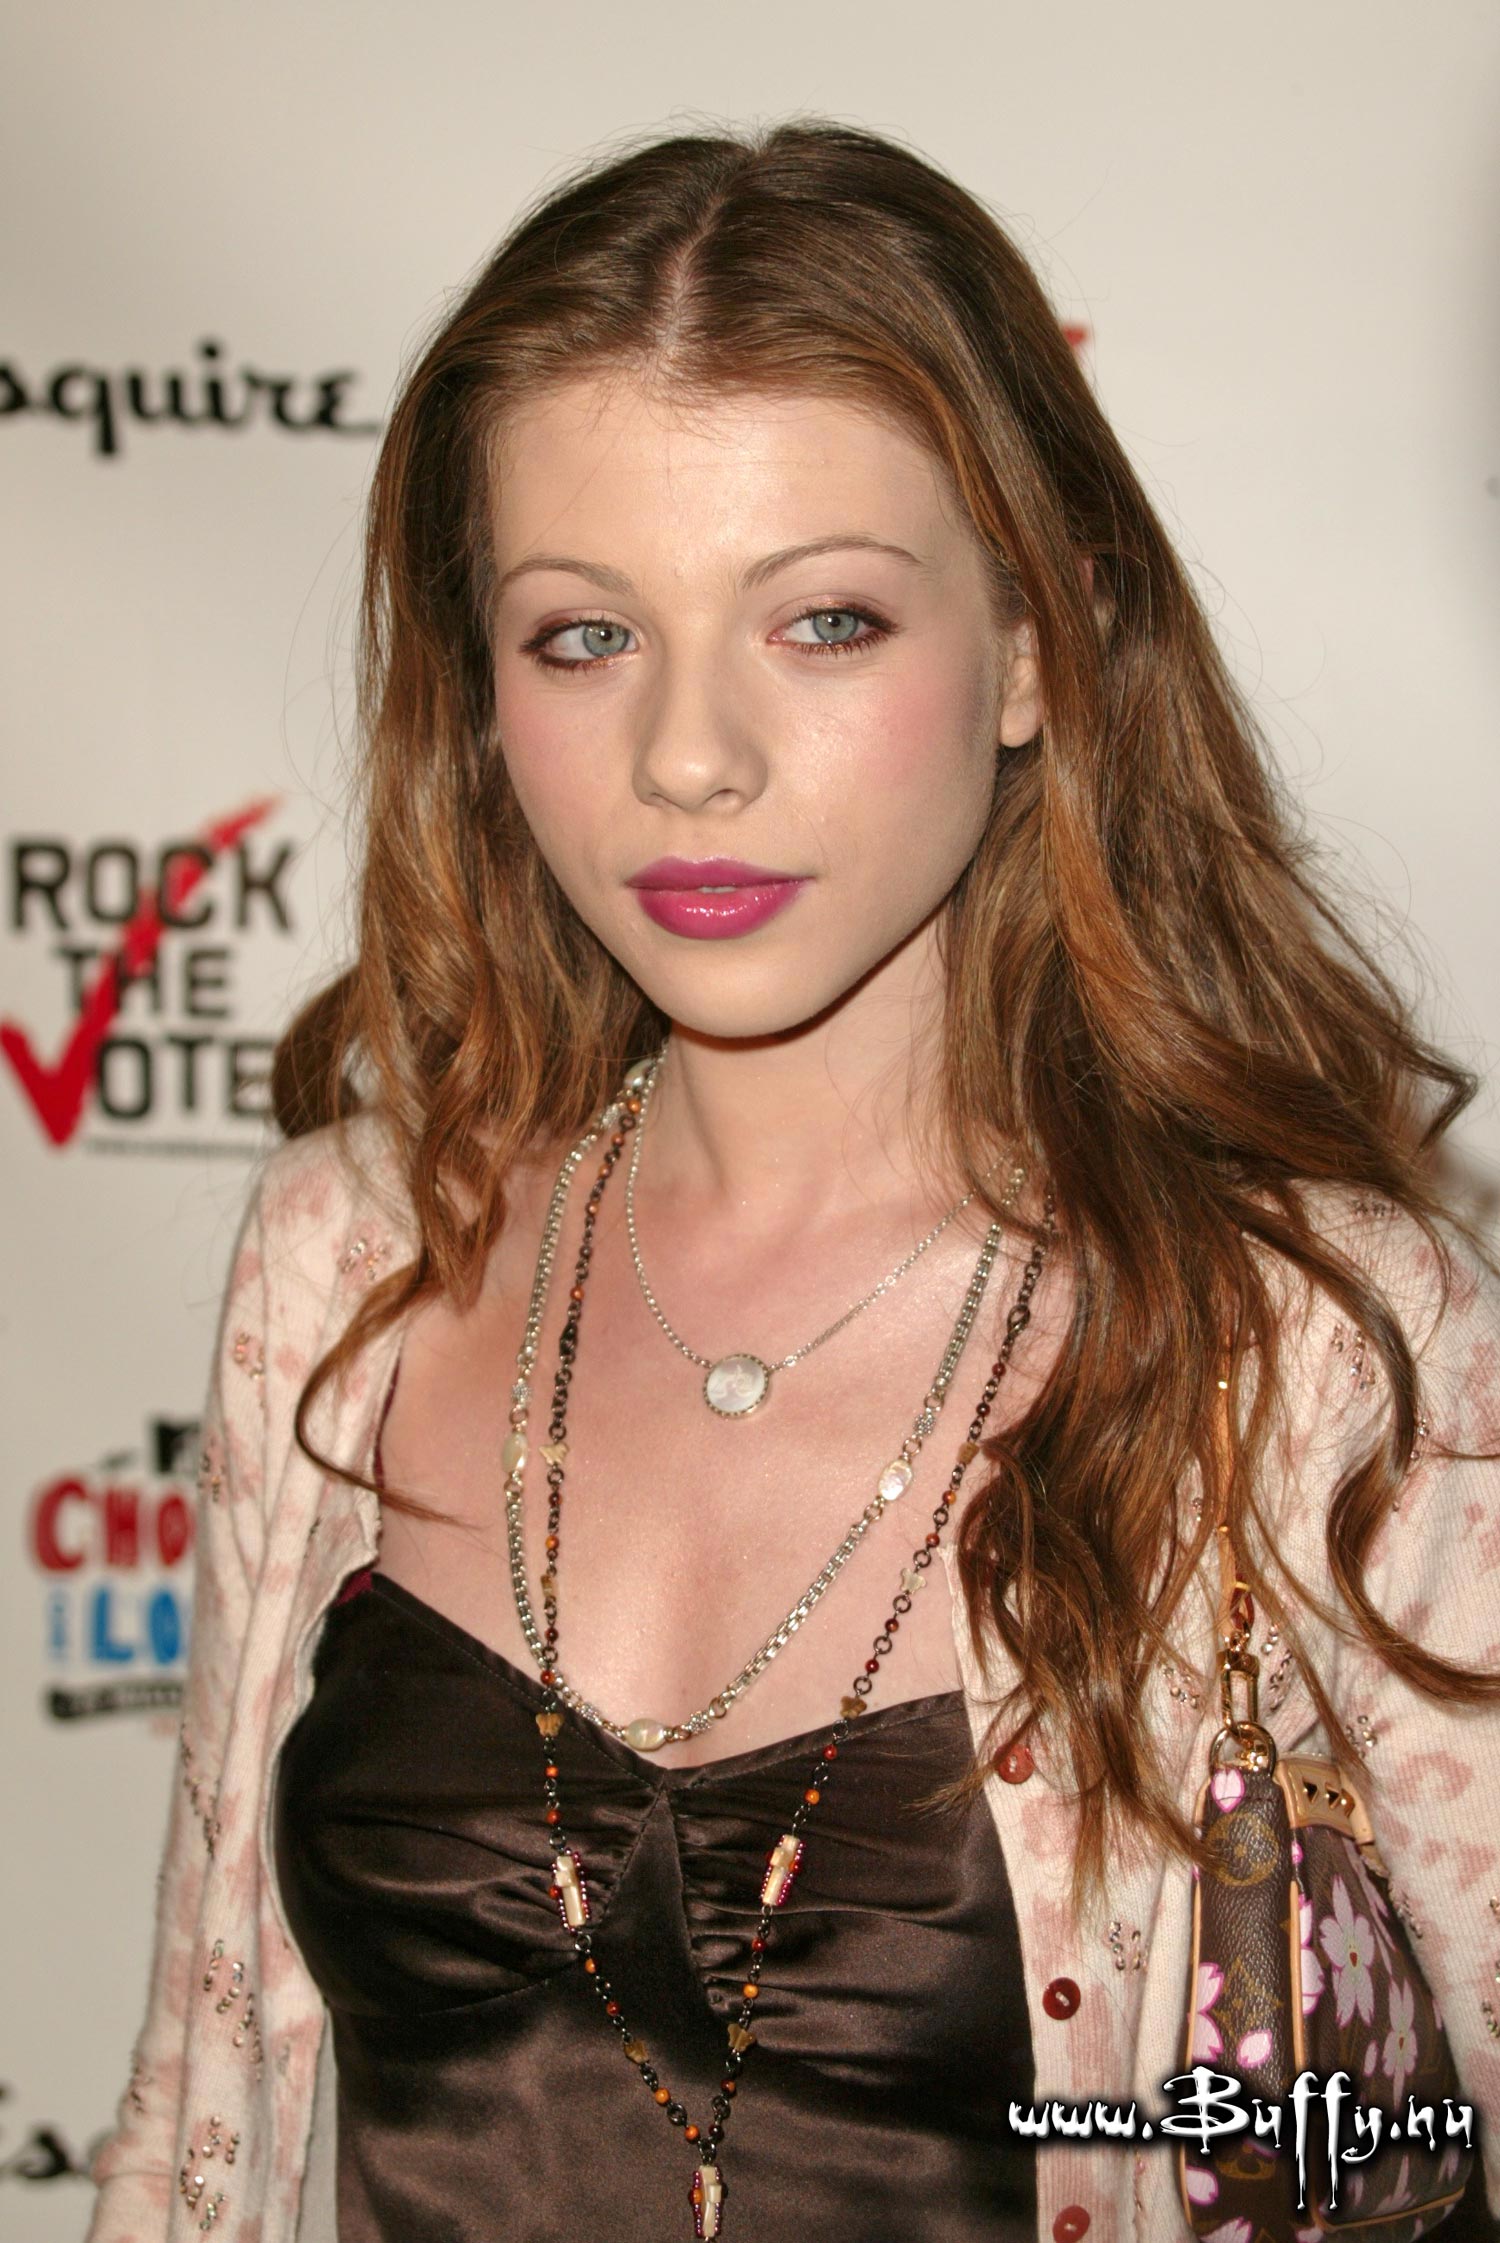 michelle-trachtenberg-young-hollywood-votes-party-hq-02-1500.jpg